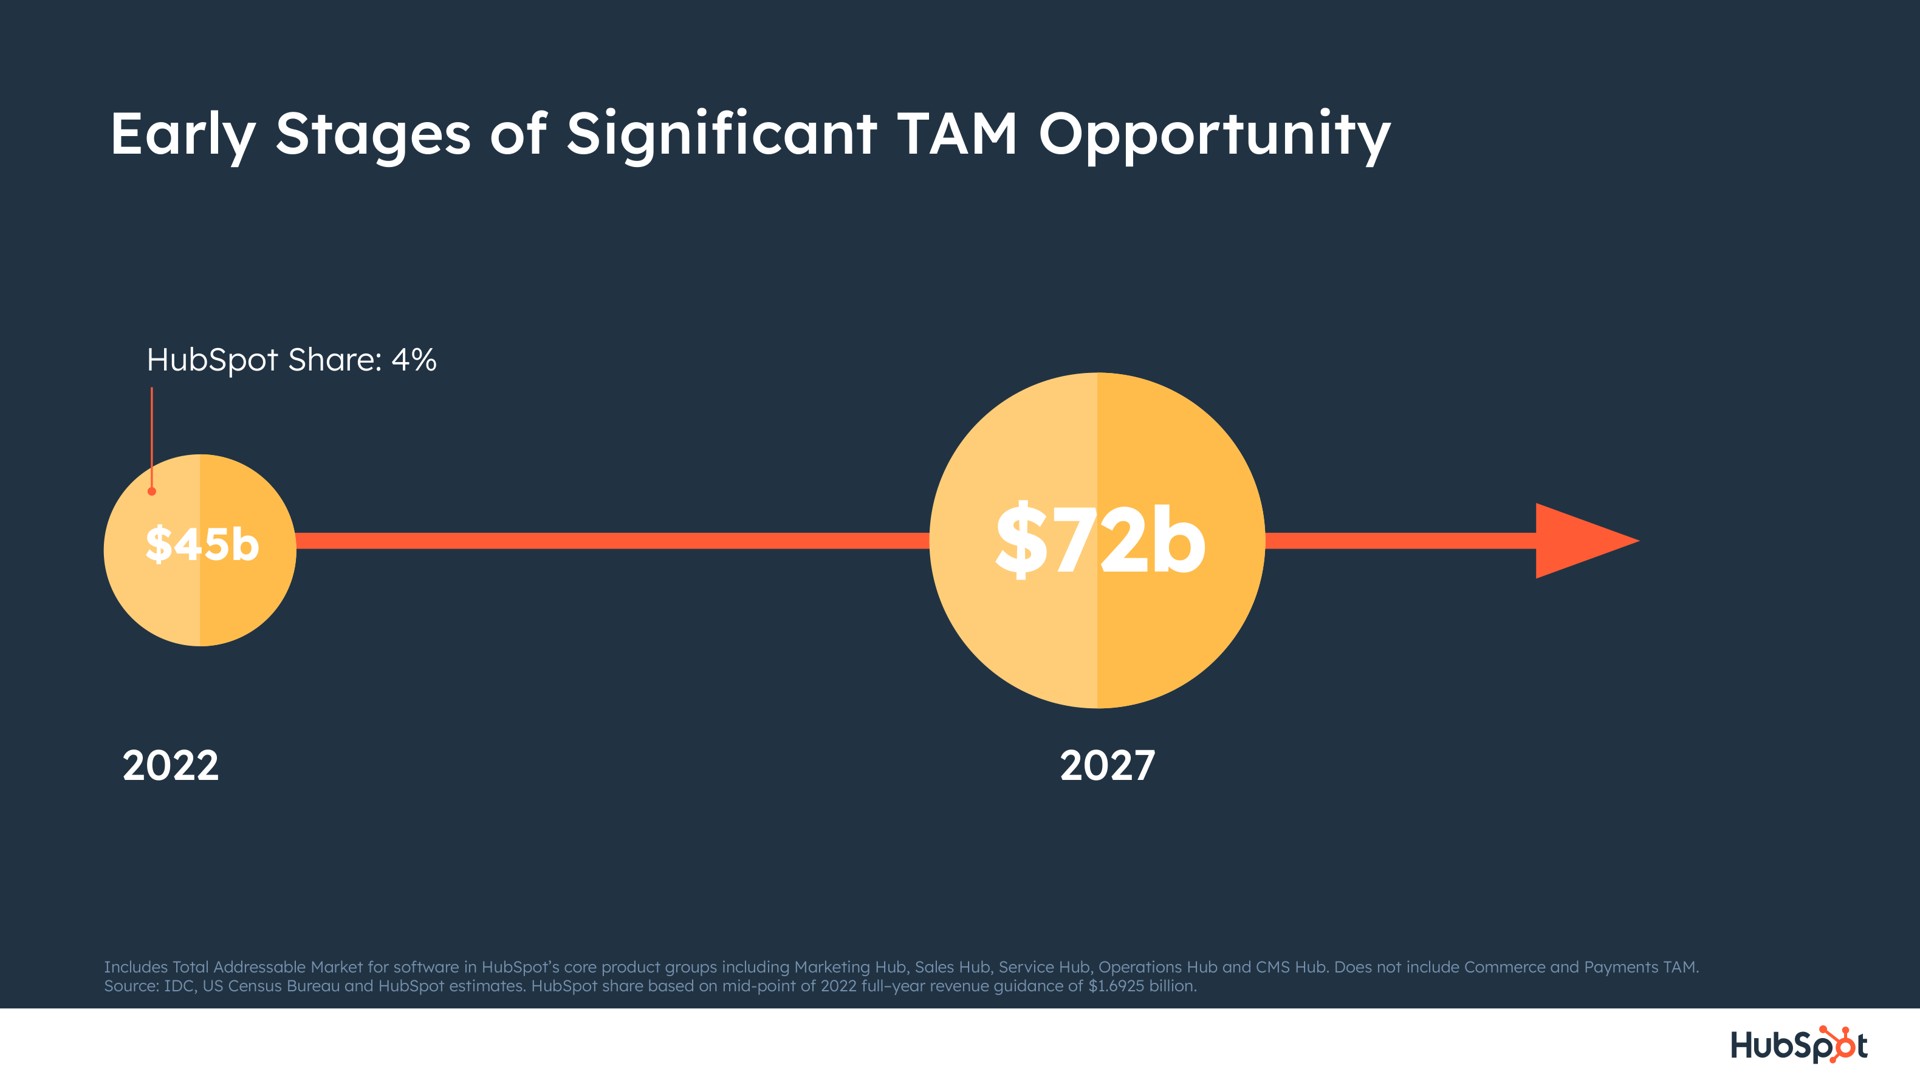 early stages of cant tam opportunity significant | Hubspot